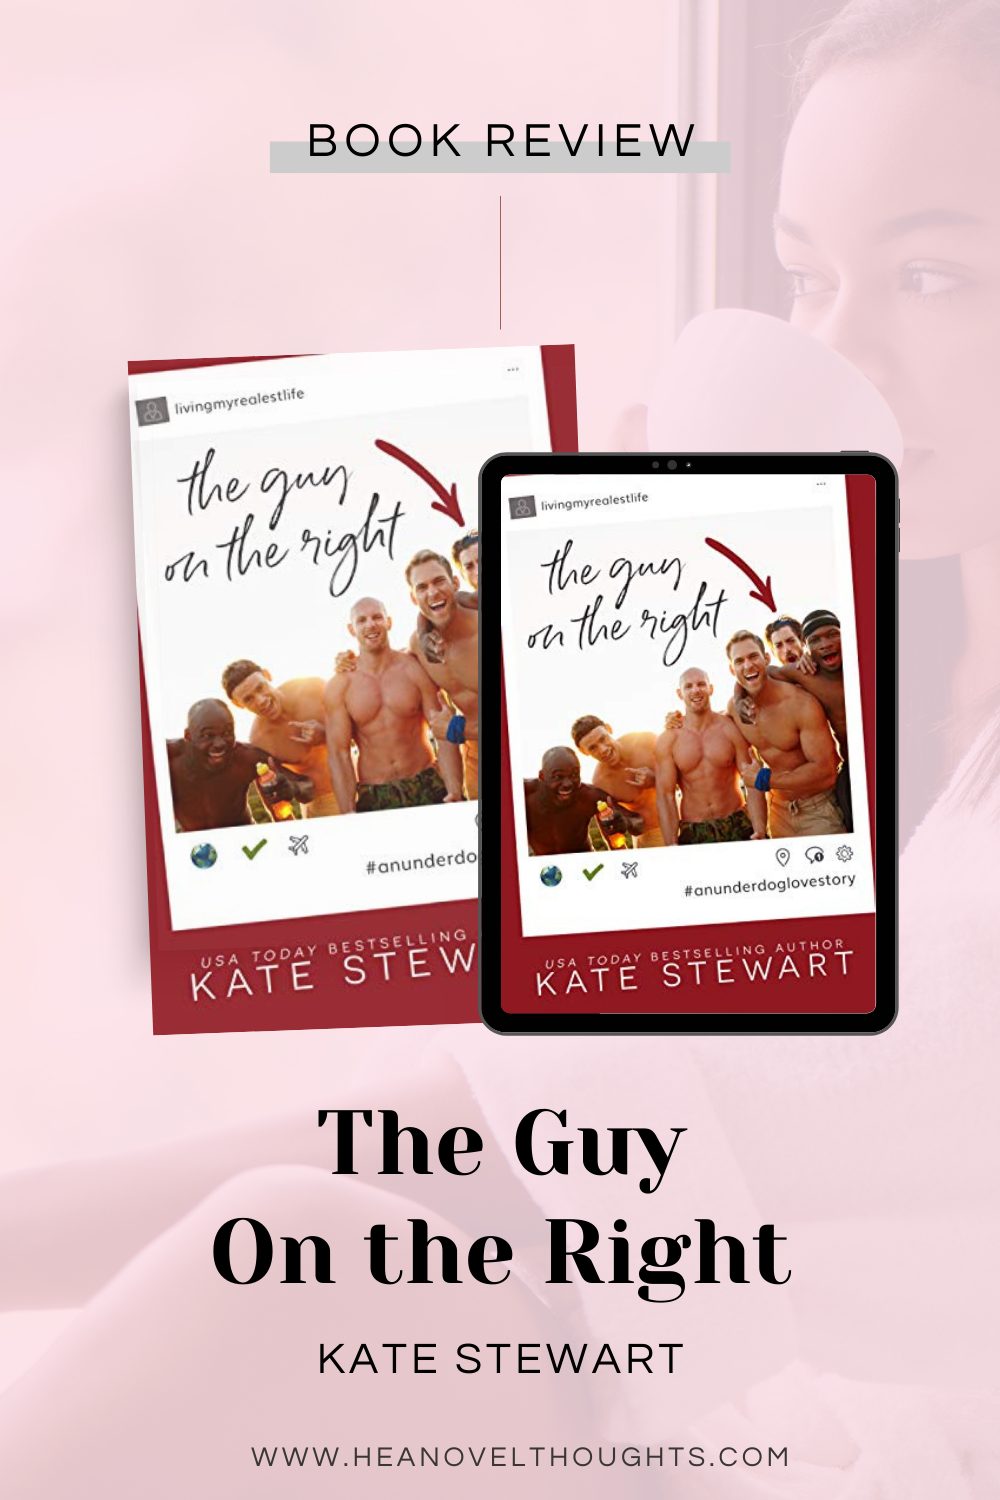 The Guy on the Right by Kate Stewart